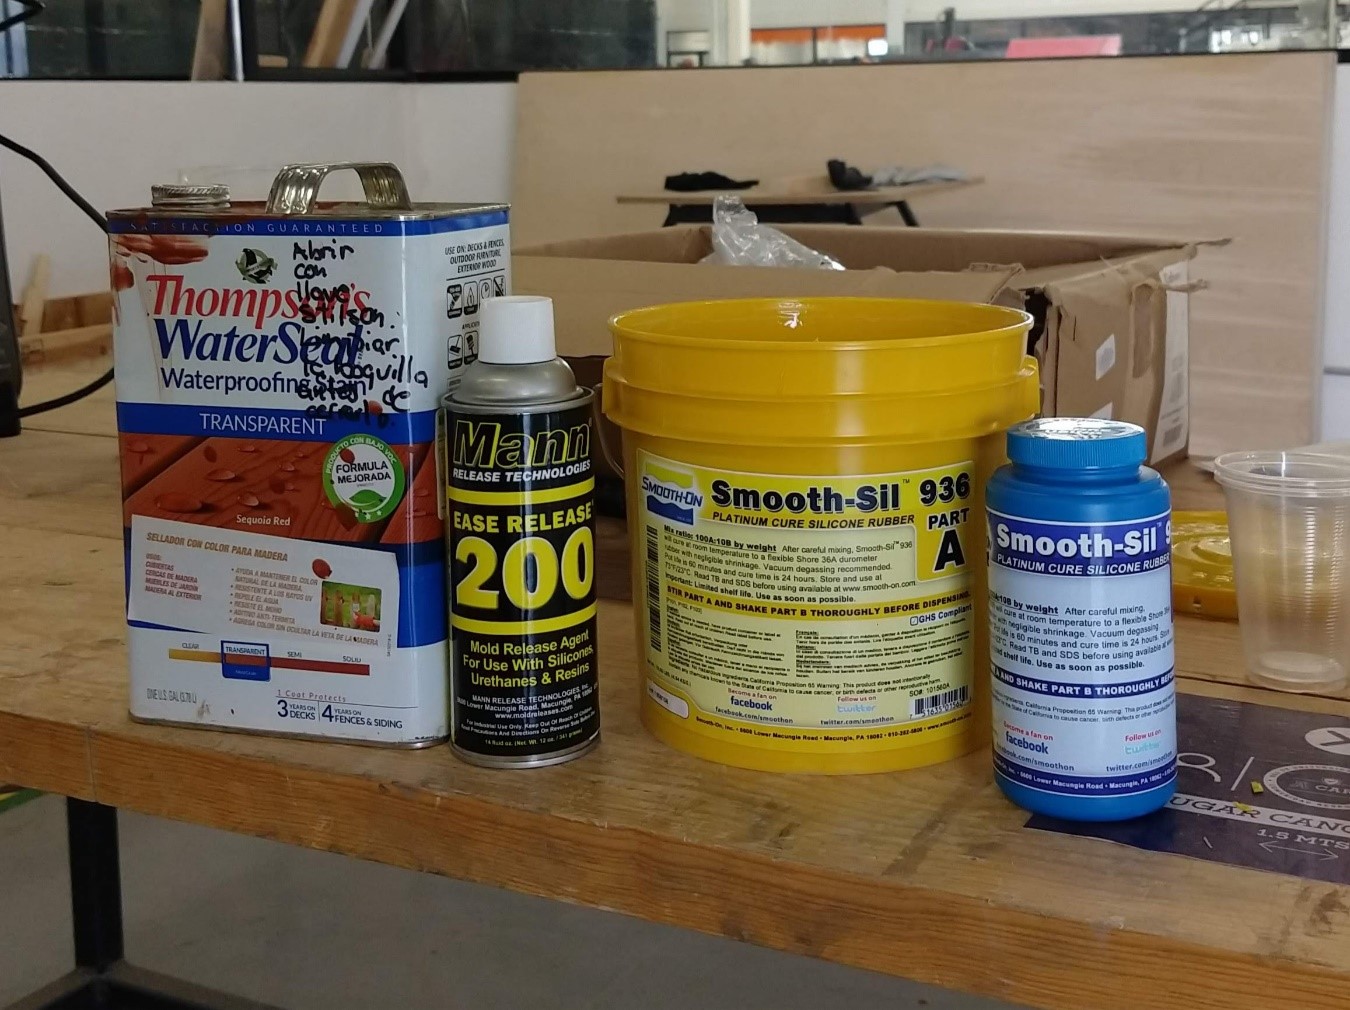 The materials for the mold